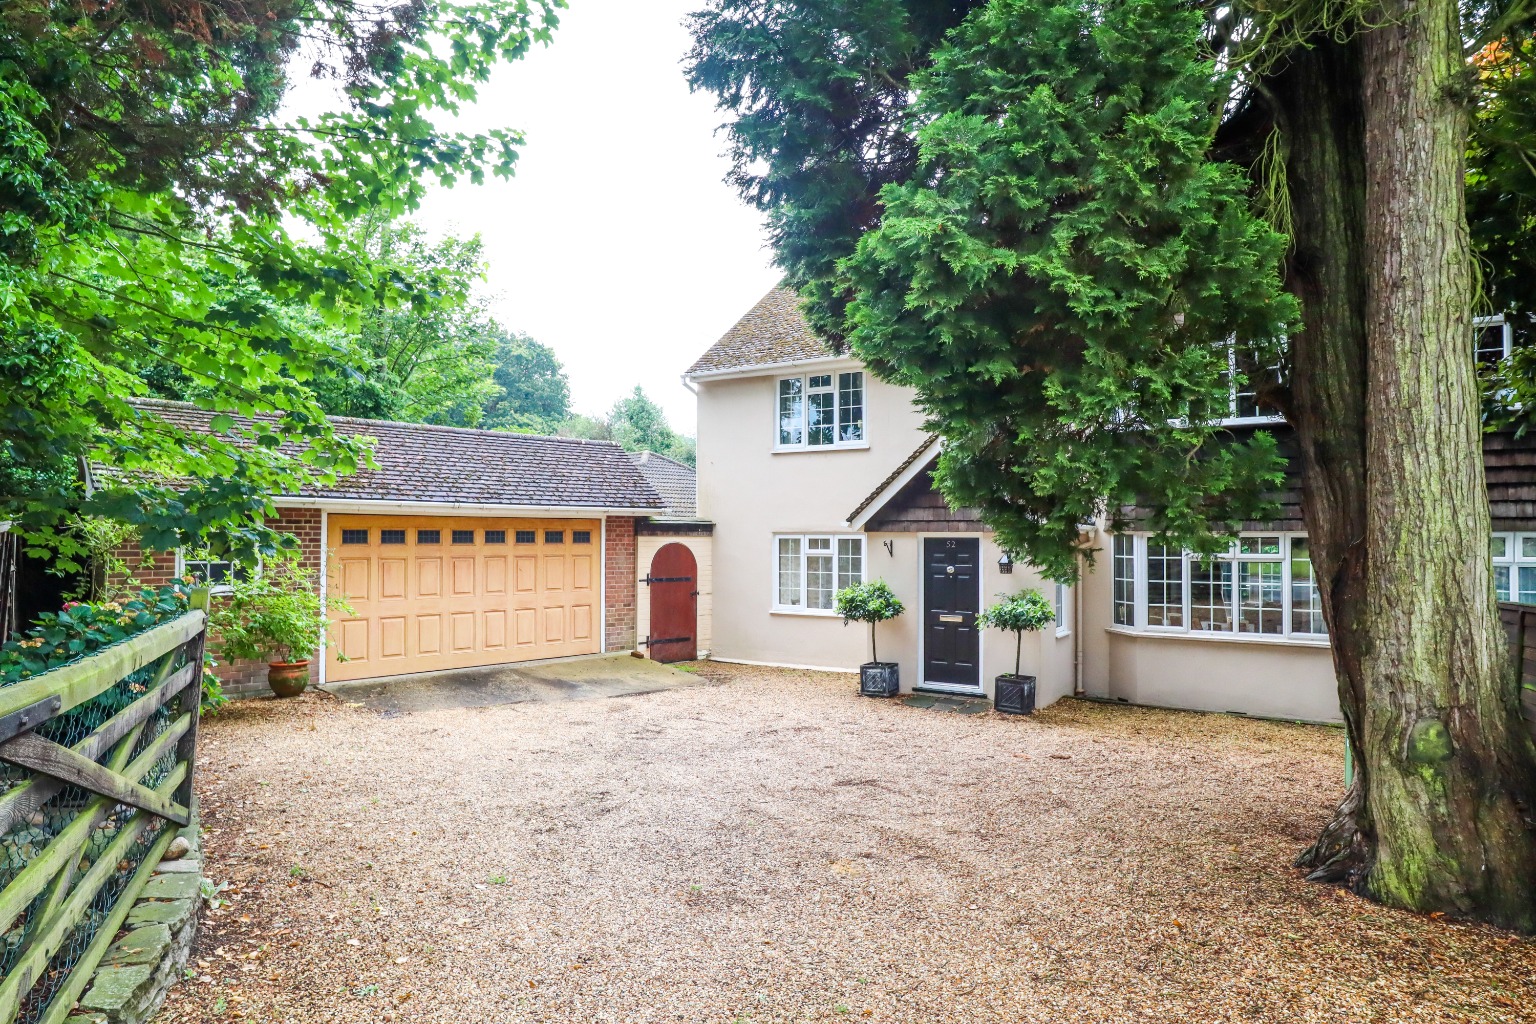 This is a very rare opportunity to purchase a lovely, sizeable family home that hasn't been to the market in over 40 years!  With five bedrooms, two reception rooms, kitchen/breakfast room and a stunning family bathroom .  Outside there are beautiful gardens and a detached double garage.